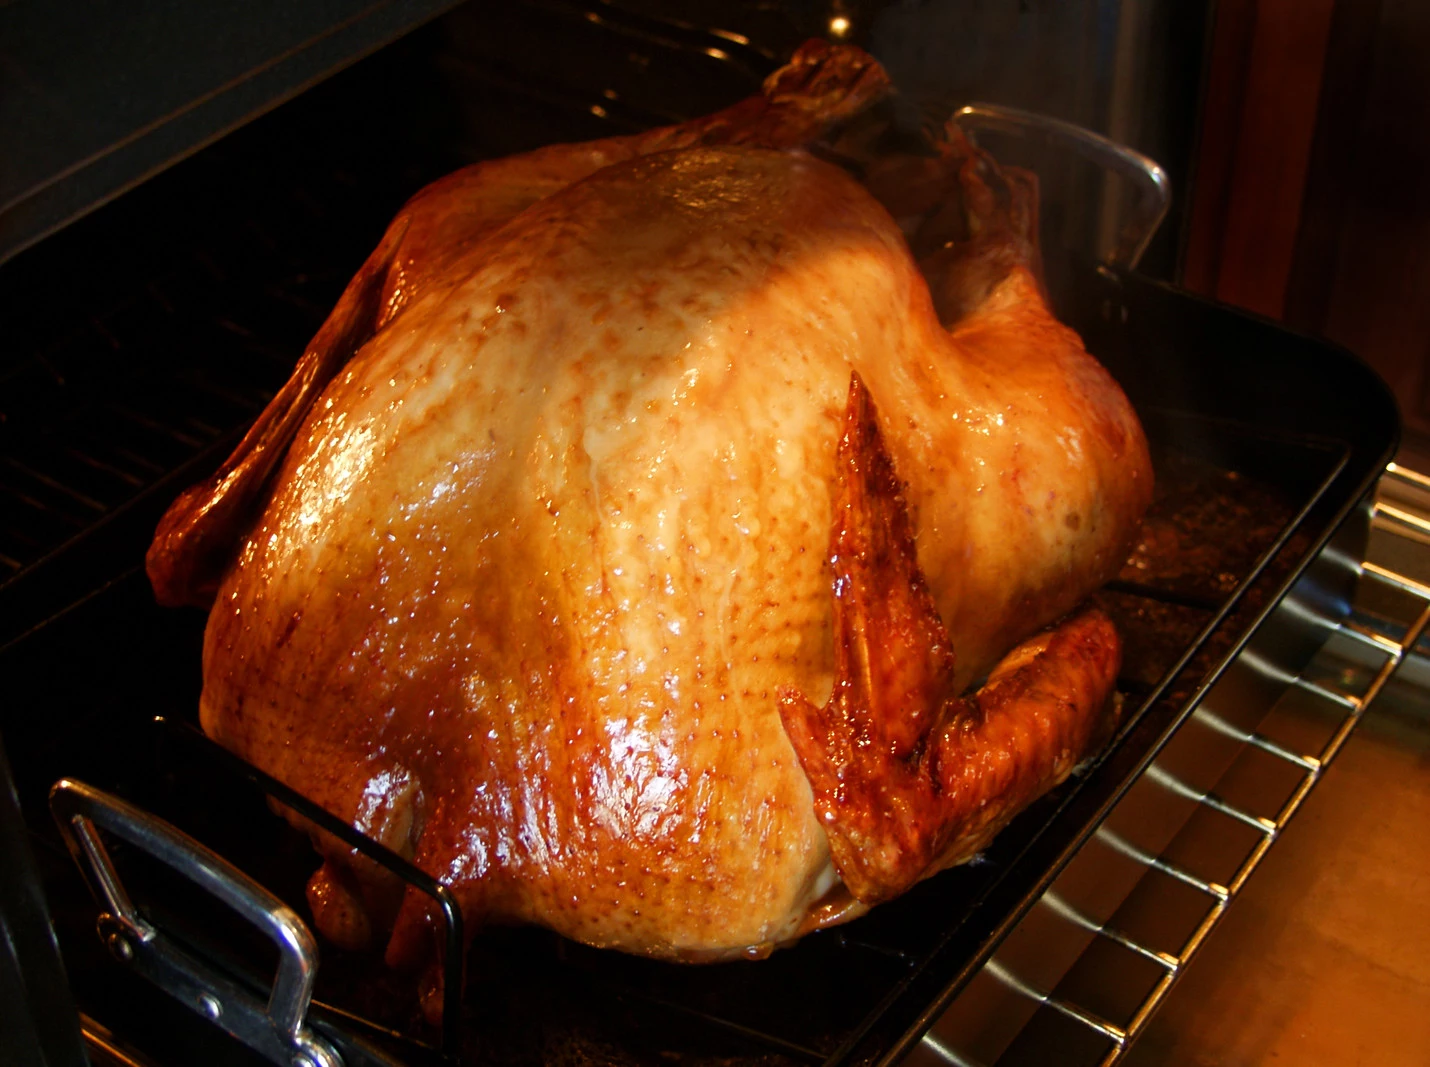 Pop up timers are notoriously inaccurate. Always check the internal te, turkey cooking